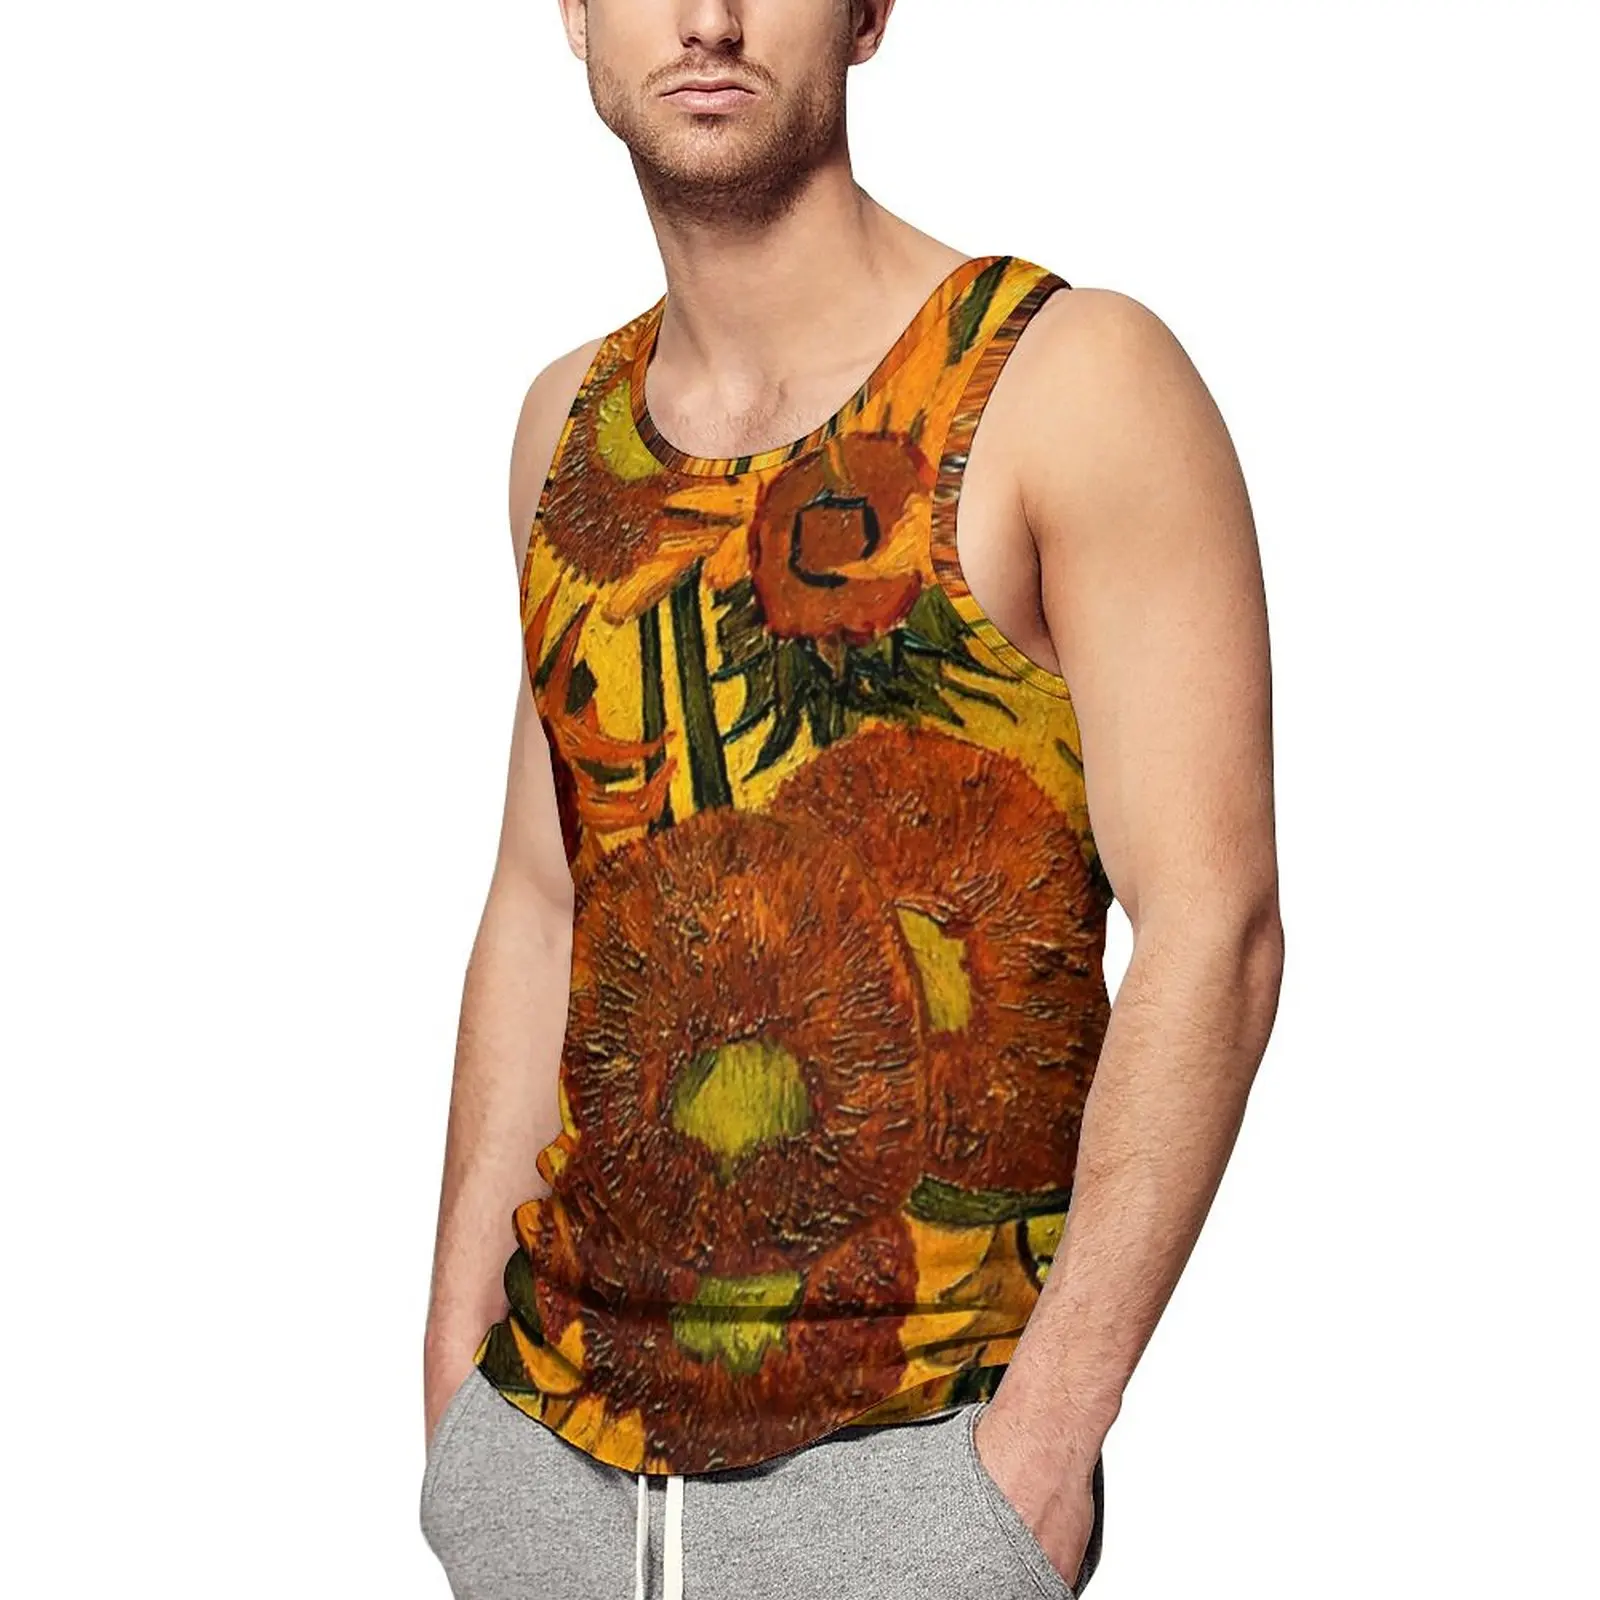 

Van Gogh Tank Top Male Vase With Sunflowers Bodybuilding Oversized Tops Daily Muscle Printed Sleeveless Vests